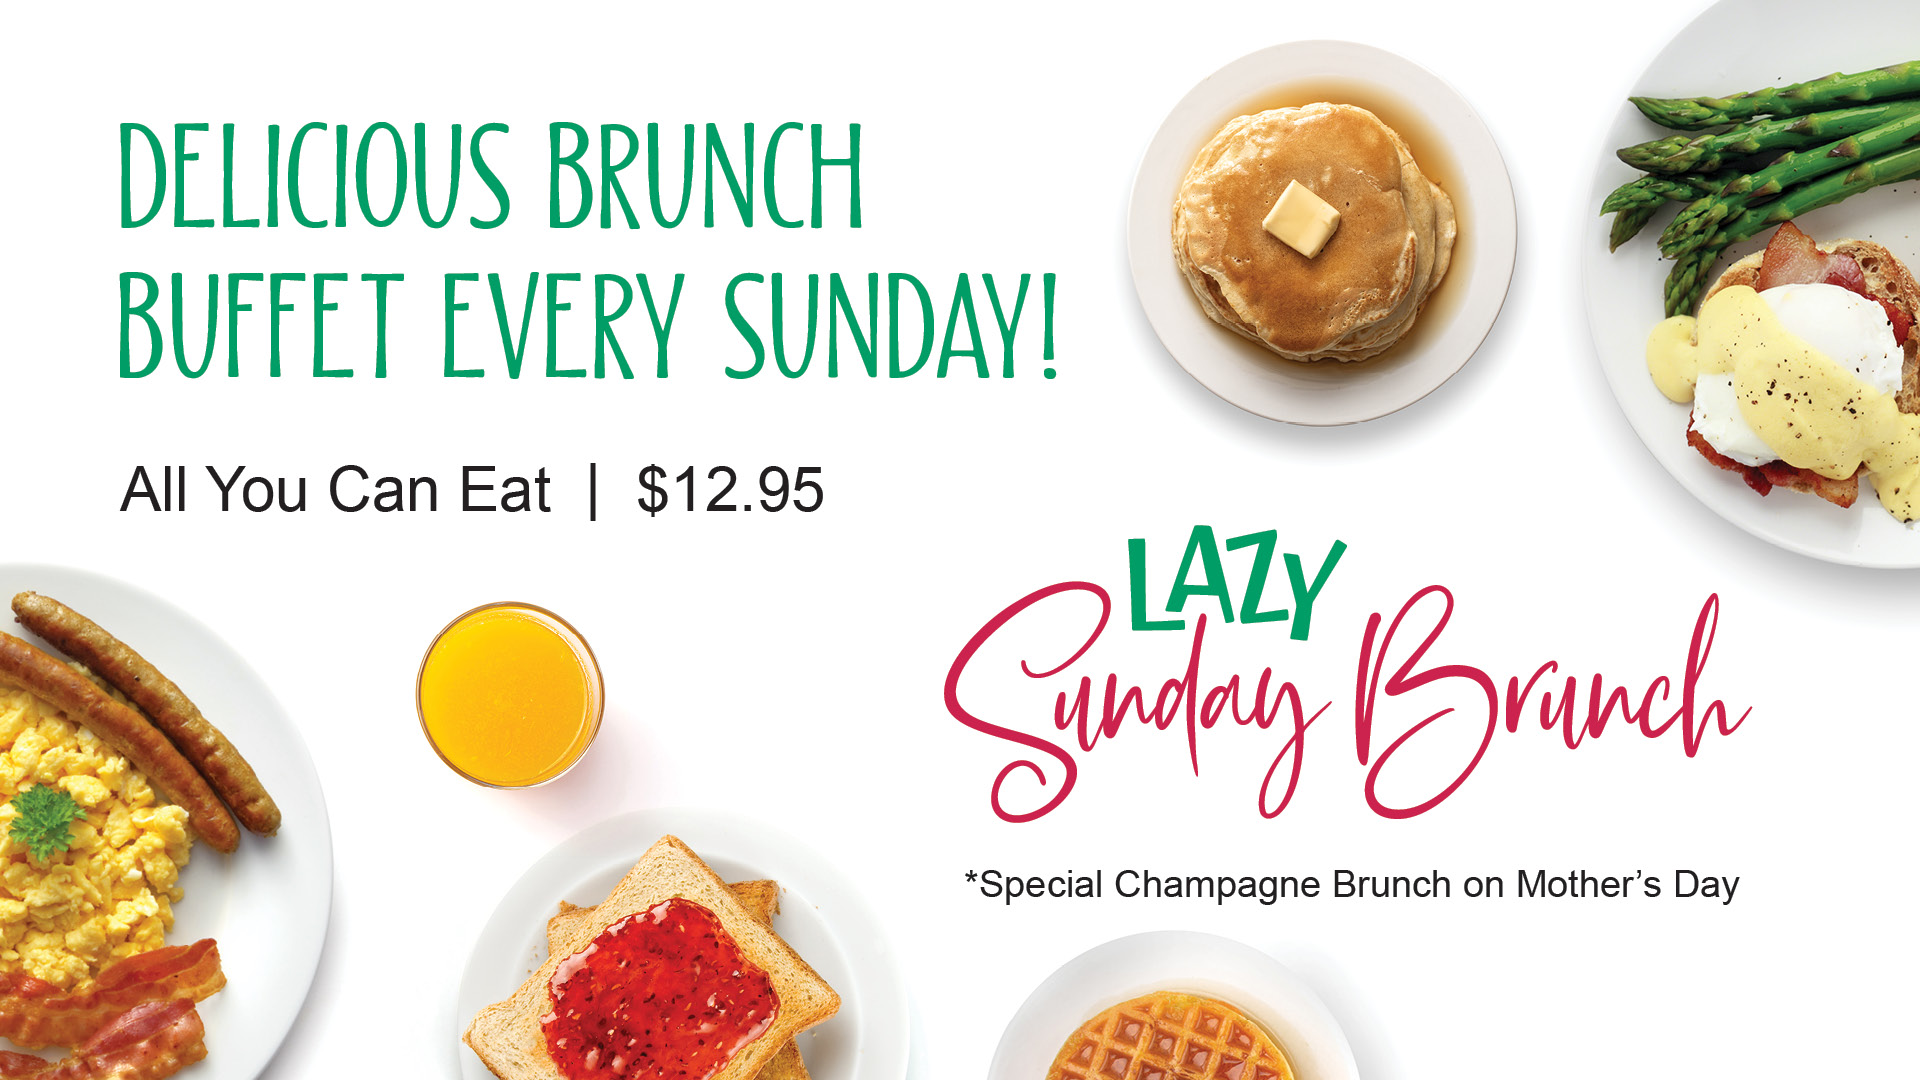 Lazy Sunday Brunch - Delicious brunch buffet every Sunday! All you can eat, $12.95. Special Champagne Brunch on Mother's Day for $25.95.